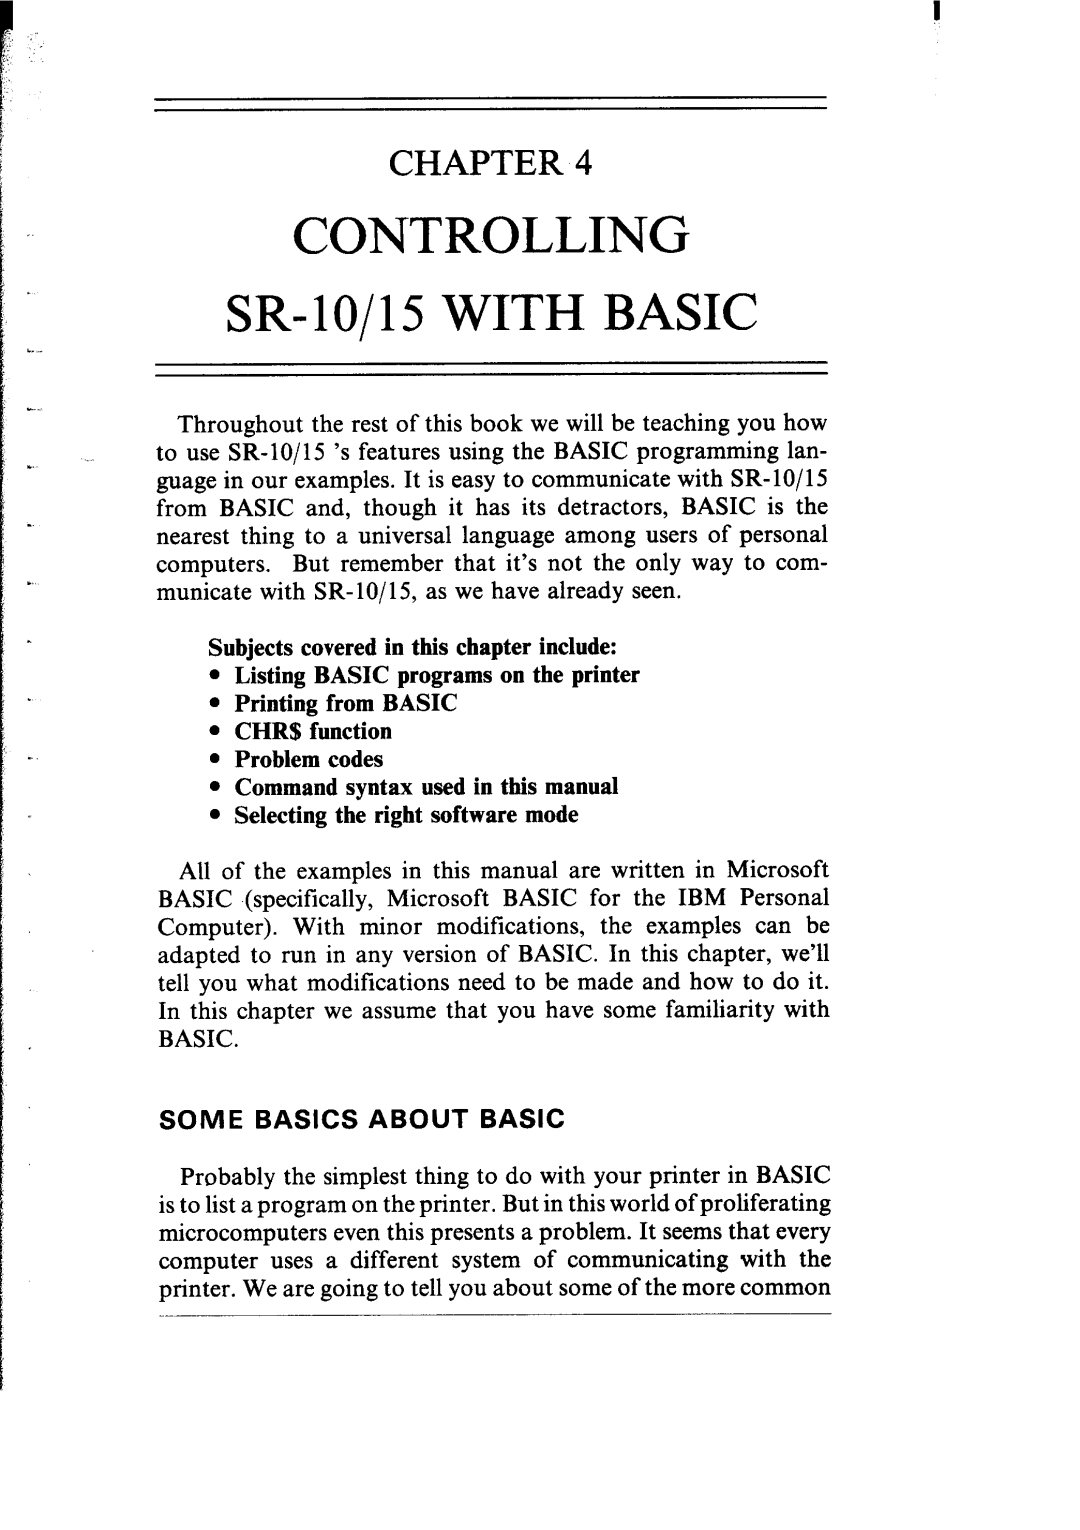 Star Micronics SR-10/I5 CONTROLLING SR-lo/15 WITH BASIC, Subjects covered in this chapter include, Some Basics About Basic 